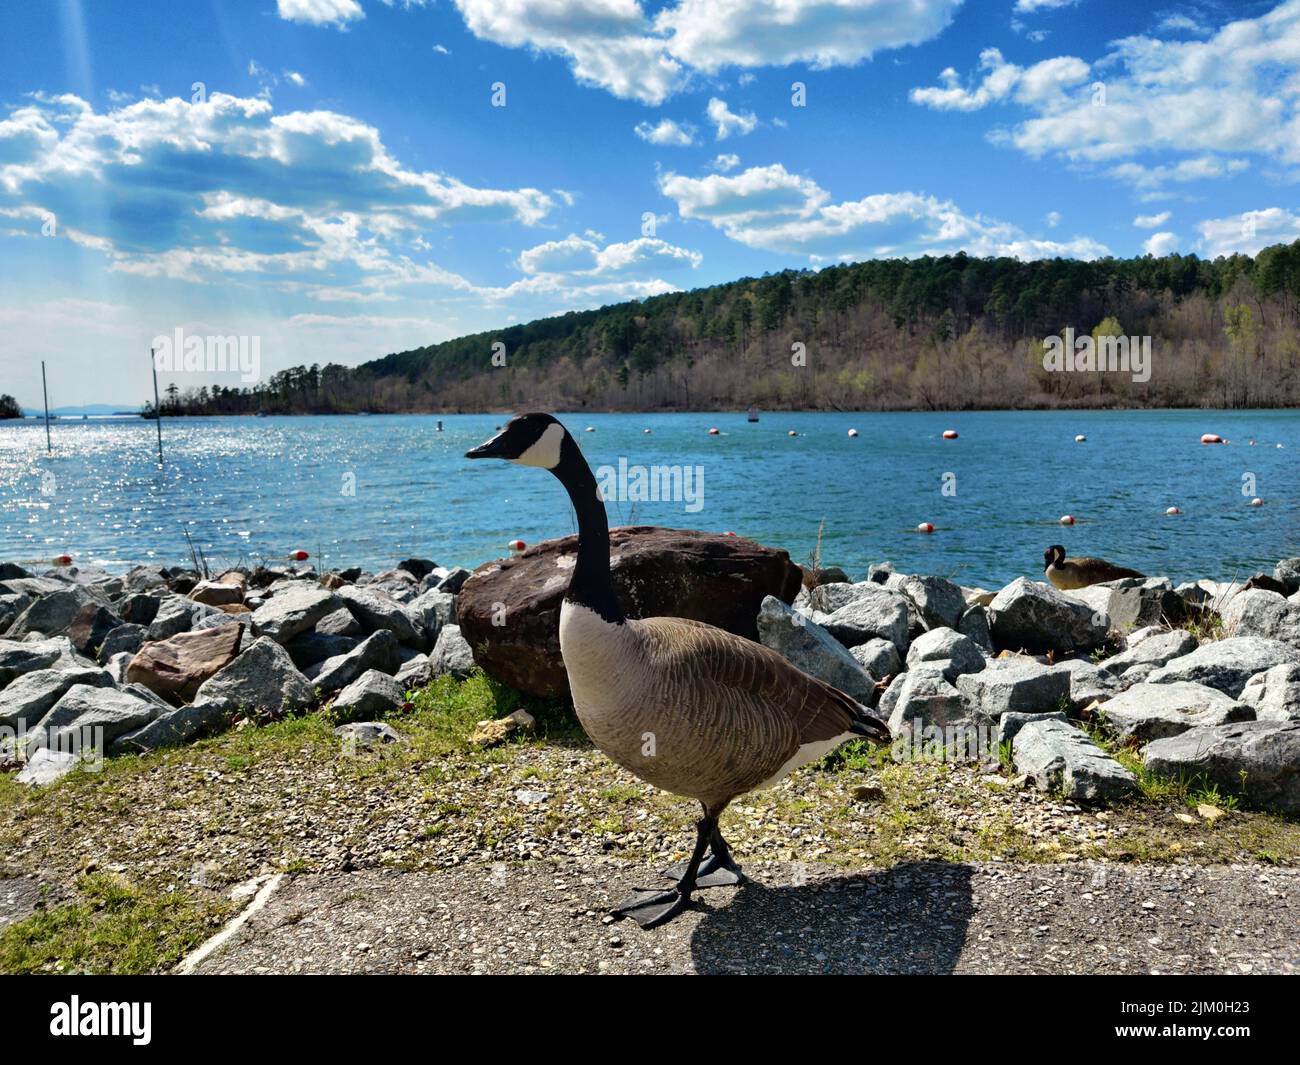 A Canada goose (Branta canadensis) at the lakeside with a forest in the background Stock Photo